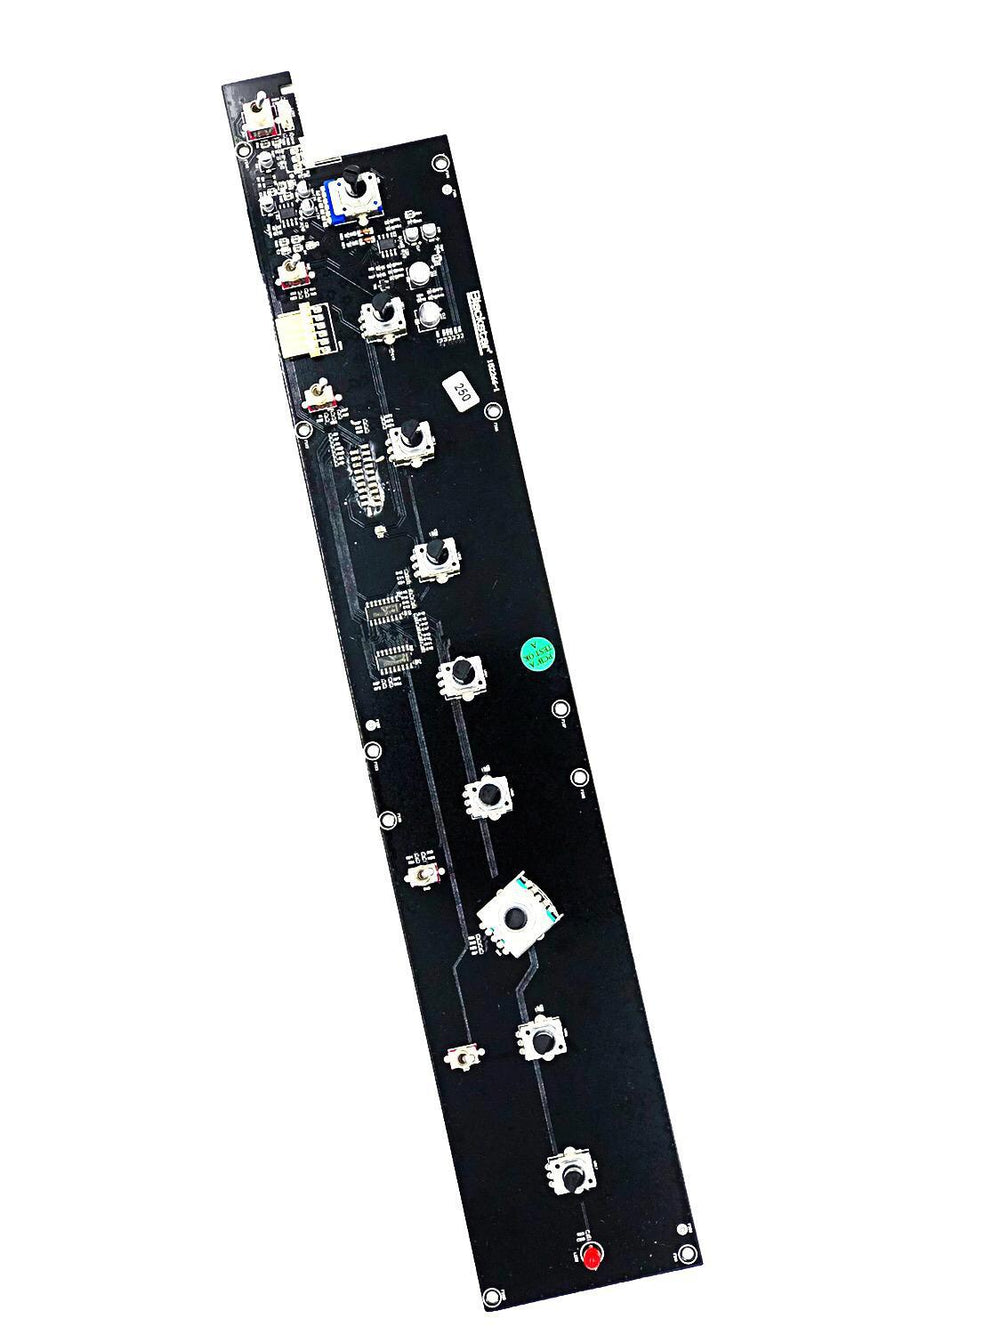 Blackstar PCB Unity 250 Preamp Board with all Pots and Switches - British Audio